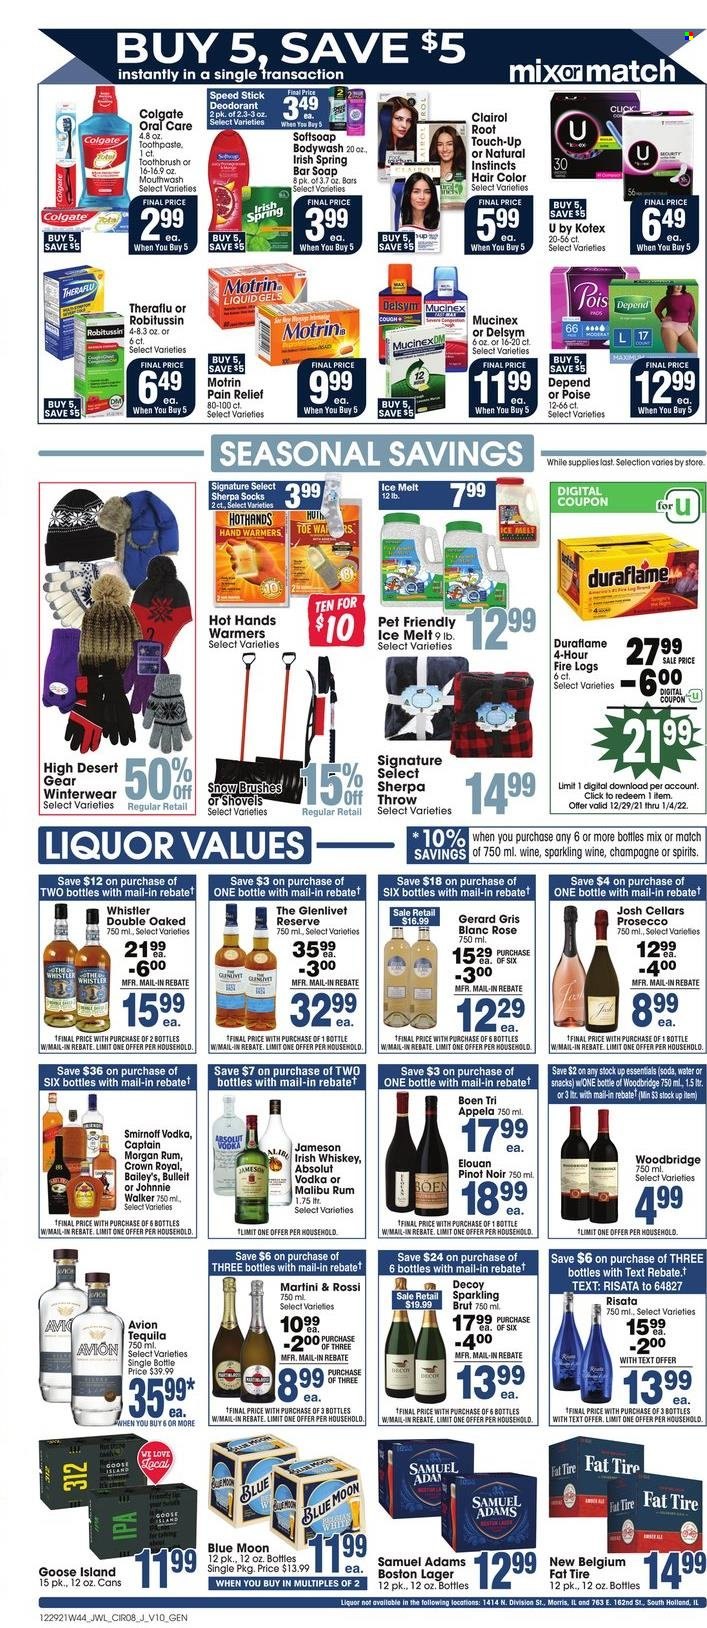 thumbnail - Jewel Osco Flyer - 12/29/2021 - 01/04/2022 - Sales products - soda, sparkling wine, prosecco, Pinot Noir, Woodbridge, rosé wine, Captain Morgan, rum, Smirnoff, tequila, vodka, whiskey, irish whiskey, Jameson, Baileys, Johnnie Walker, Absolut, Malibu, whisky, beer, Lager, Softsoap, soap bar, soap, Colgate, toothbrush, mouthwash, Kotex, Root Touch-Up, Clairol, hair color, anti-perspirant, Speed Stick, deodorant, Delsym, Mucinex, Robitussin, Theraflu, Motrin, Blue Moon. Page 8.